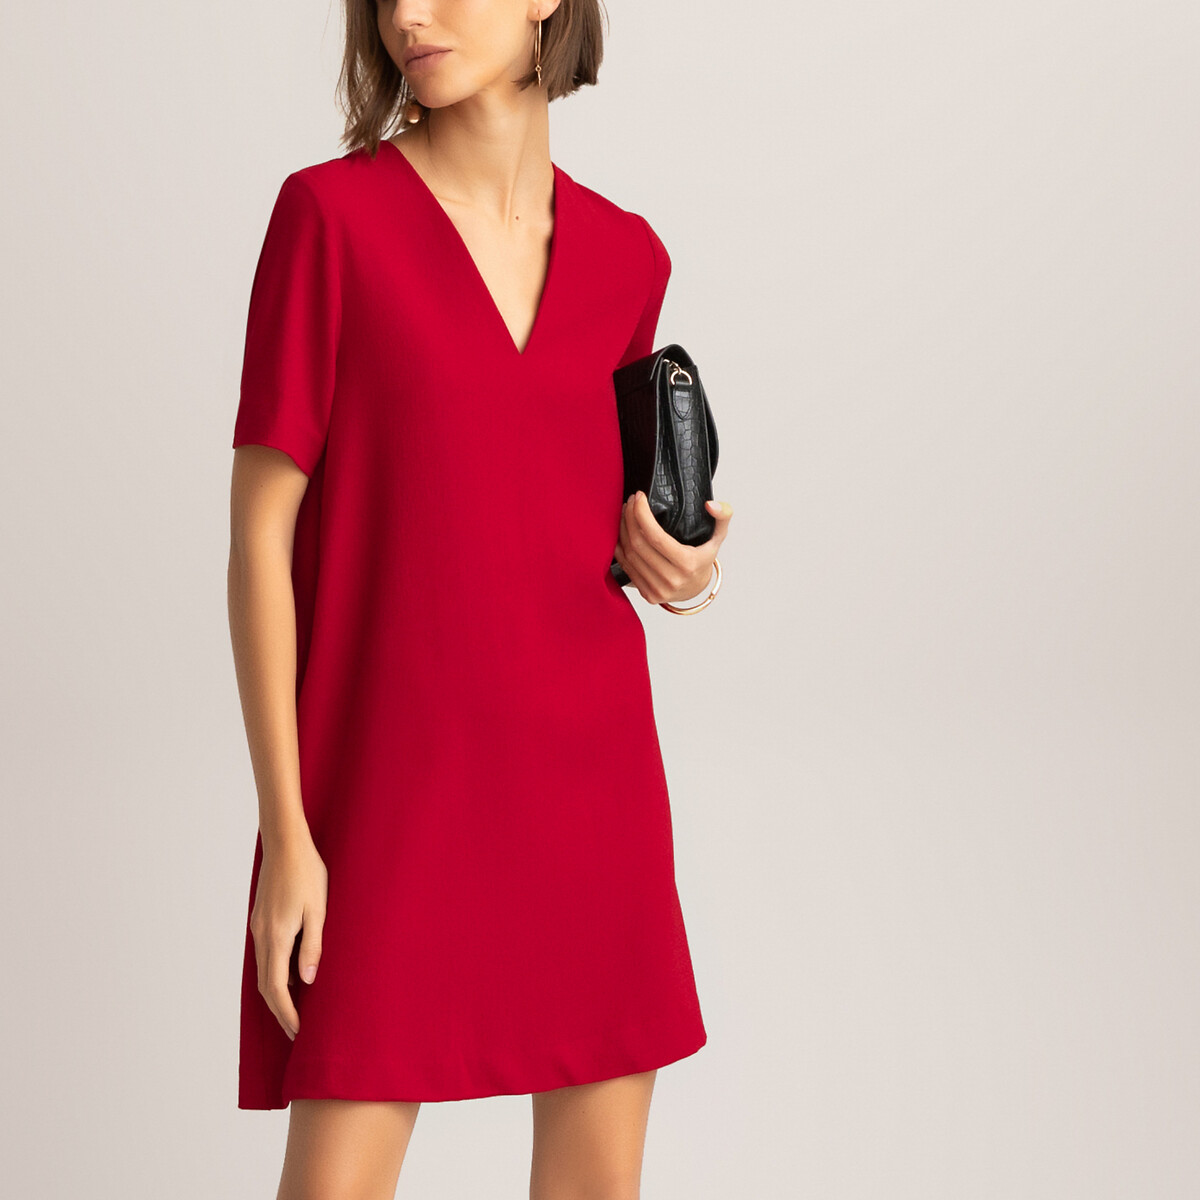 Full Mini Dress with V-Neck and Short Sleeves